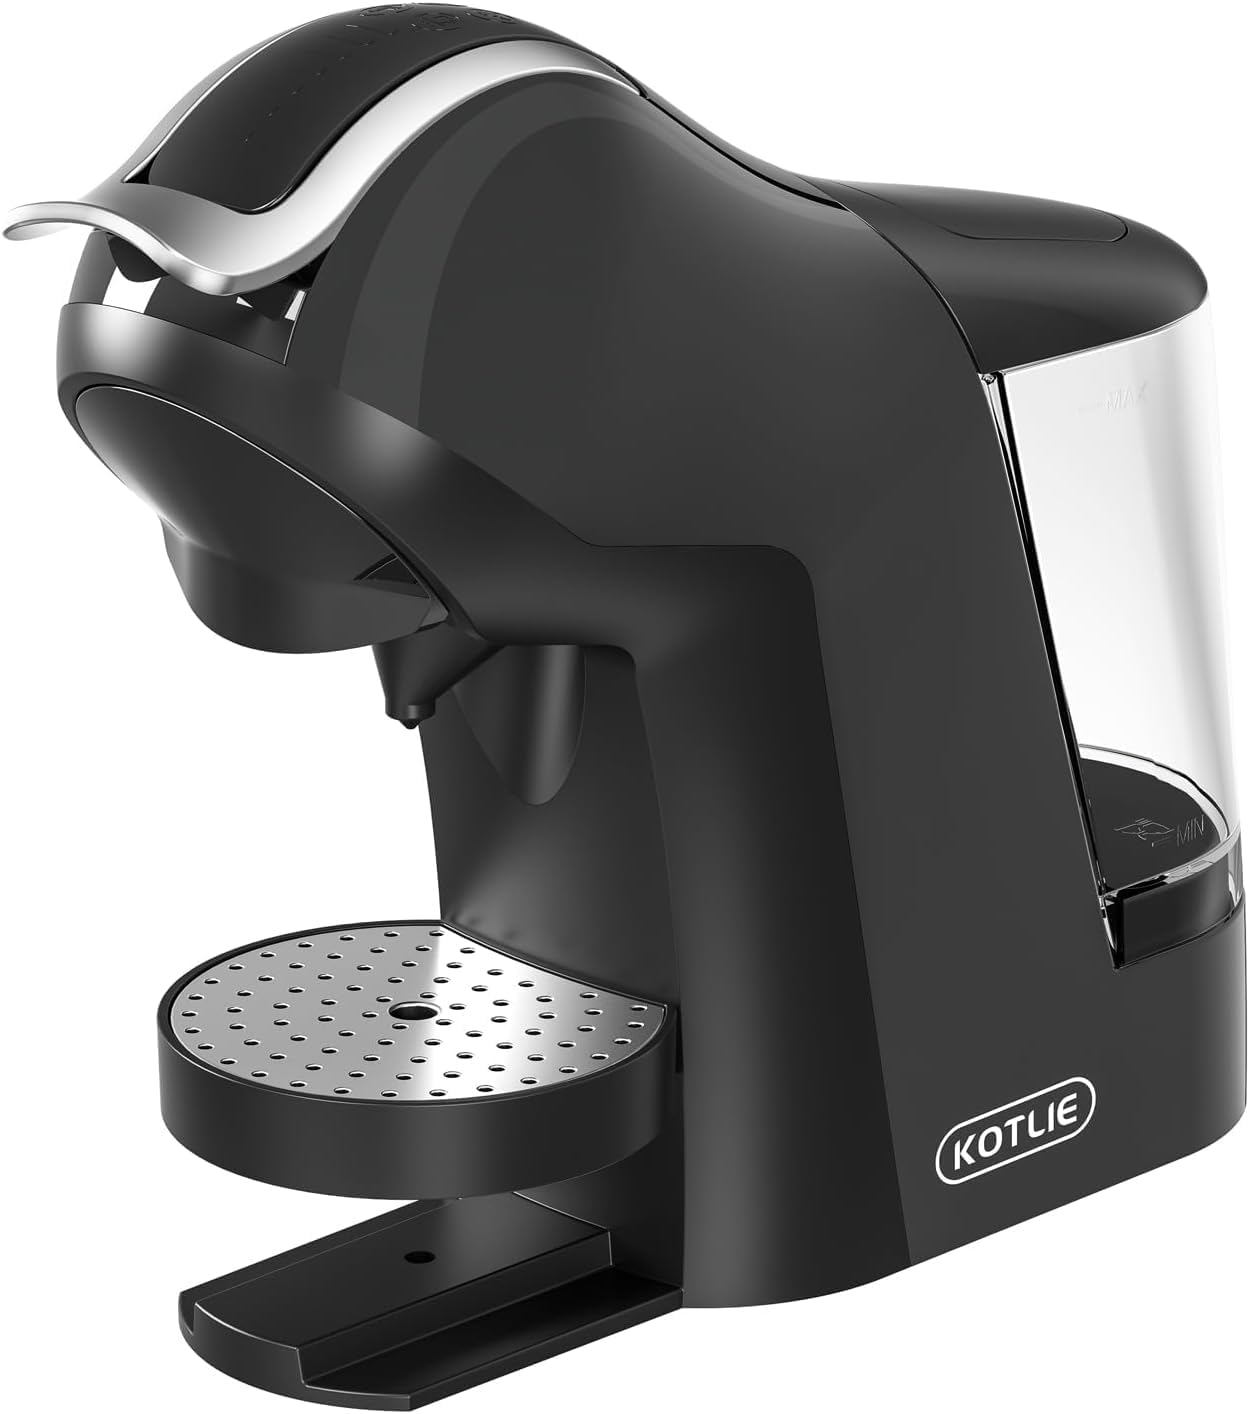 KOTLIE 308A Espresso Machine that makes milk froth,Single-Serve Coffee Maker for Kcup/Nespresso Original/Dolce Gusto/Starbucks Tea and Milk Capsules/Coffee Powder/illy 44mm ESE,19Bar,Cold&Hot brew